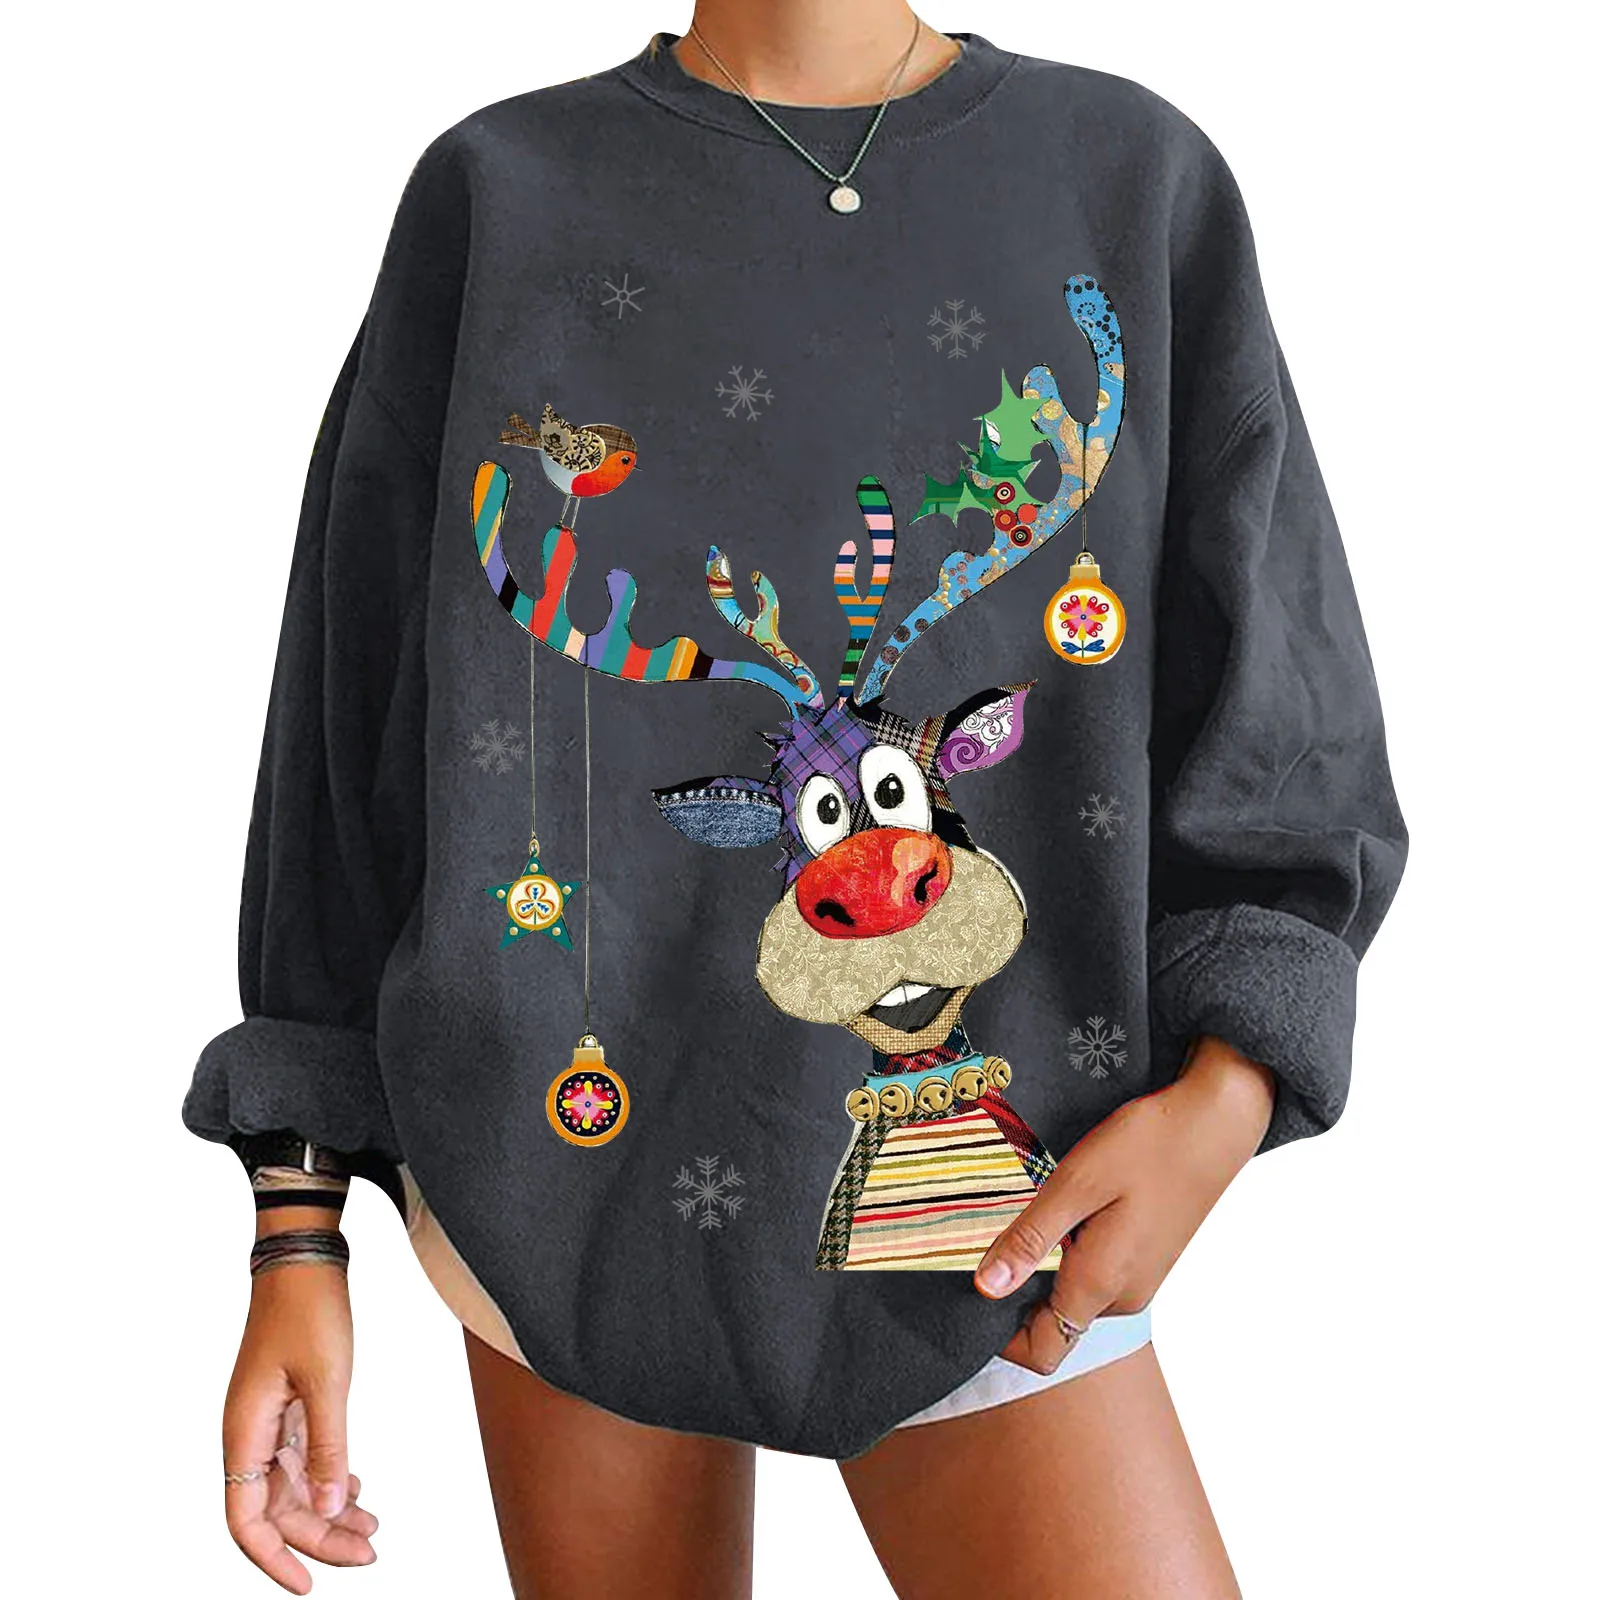 Christmas Sweater Women Autumn Winter O-neck Pullover Loose Long Sleeve Print Jumpers Warm Knit Ugly Sweater Sweatshirt Tops Y2k striped sweater